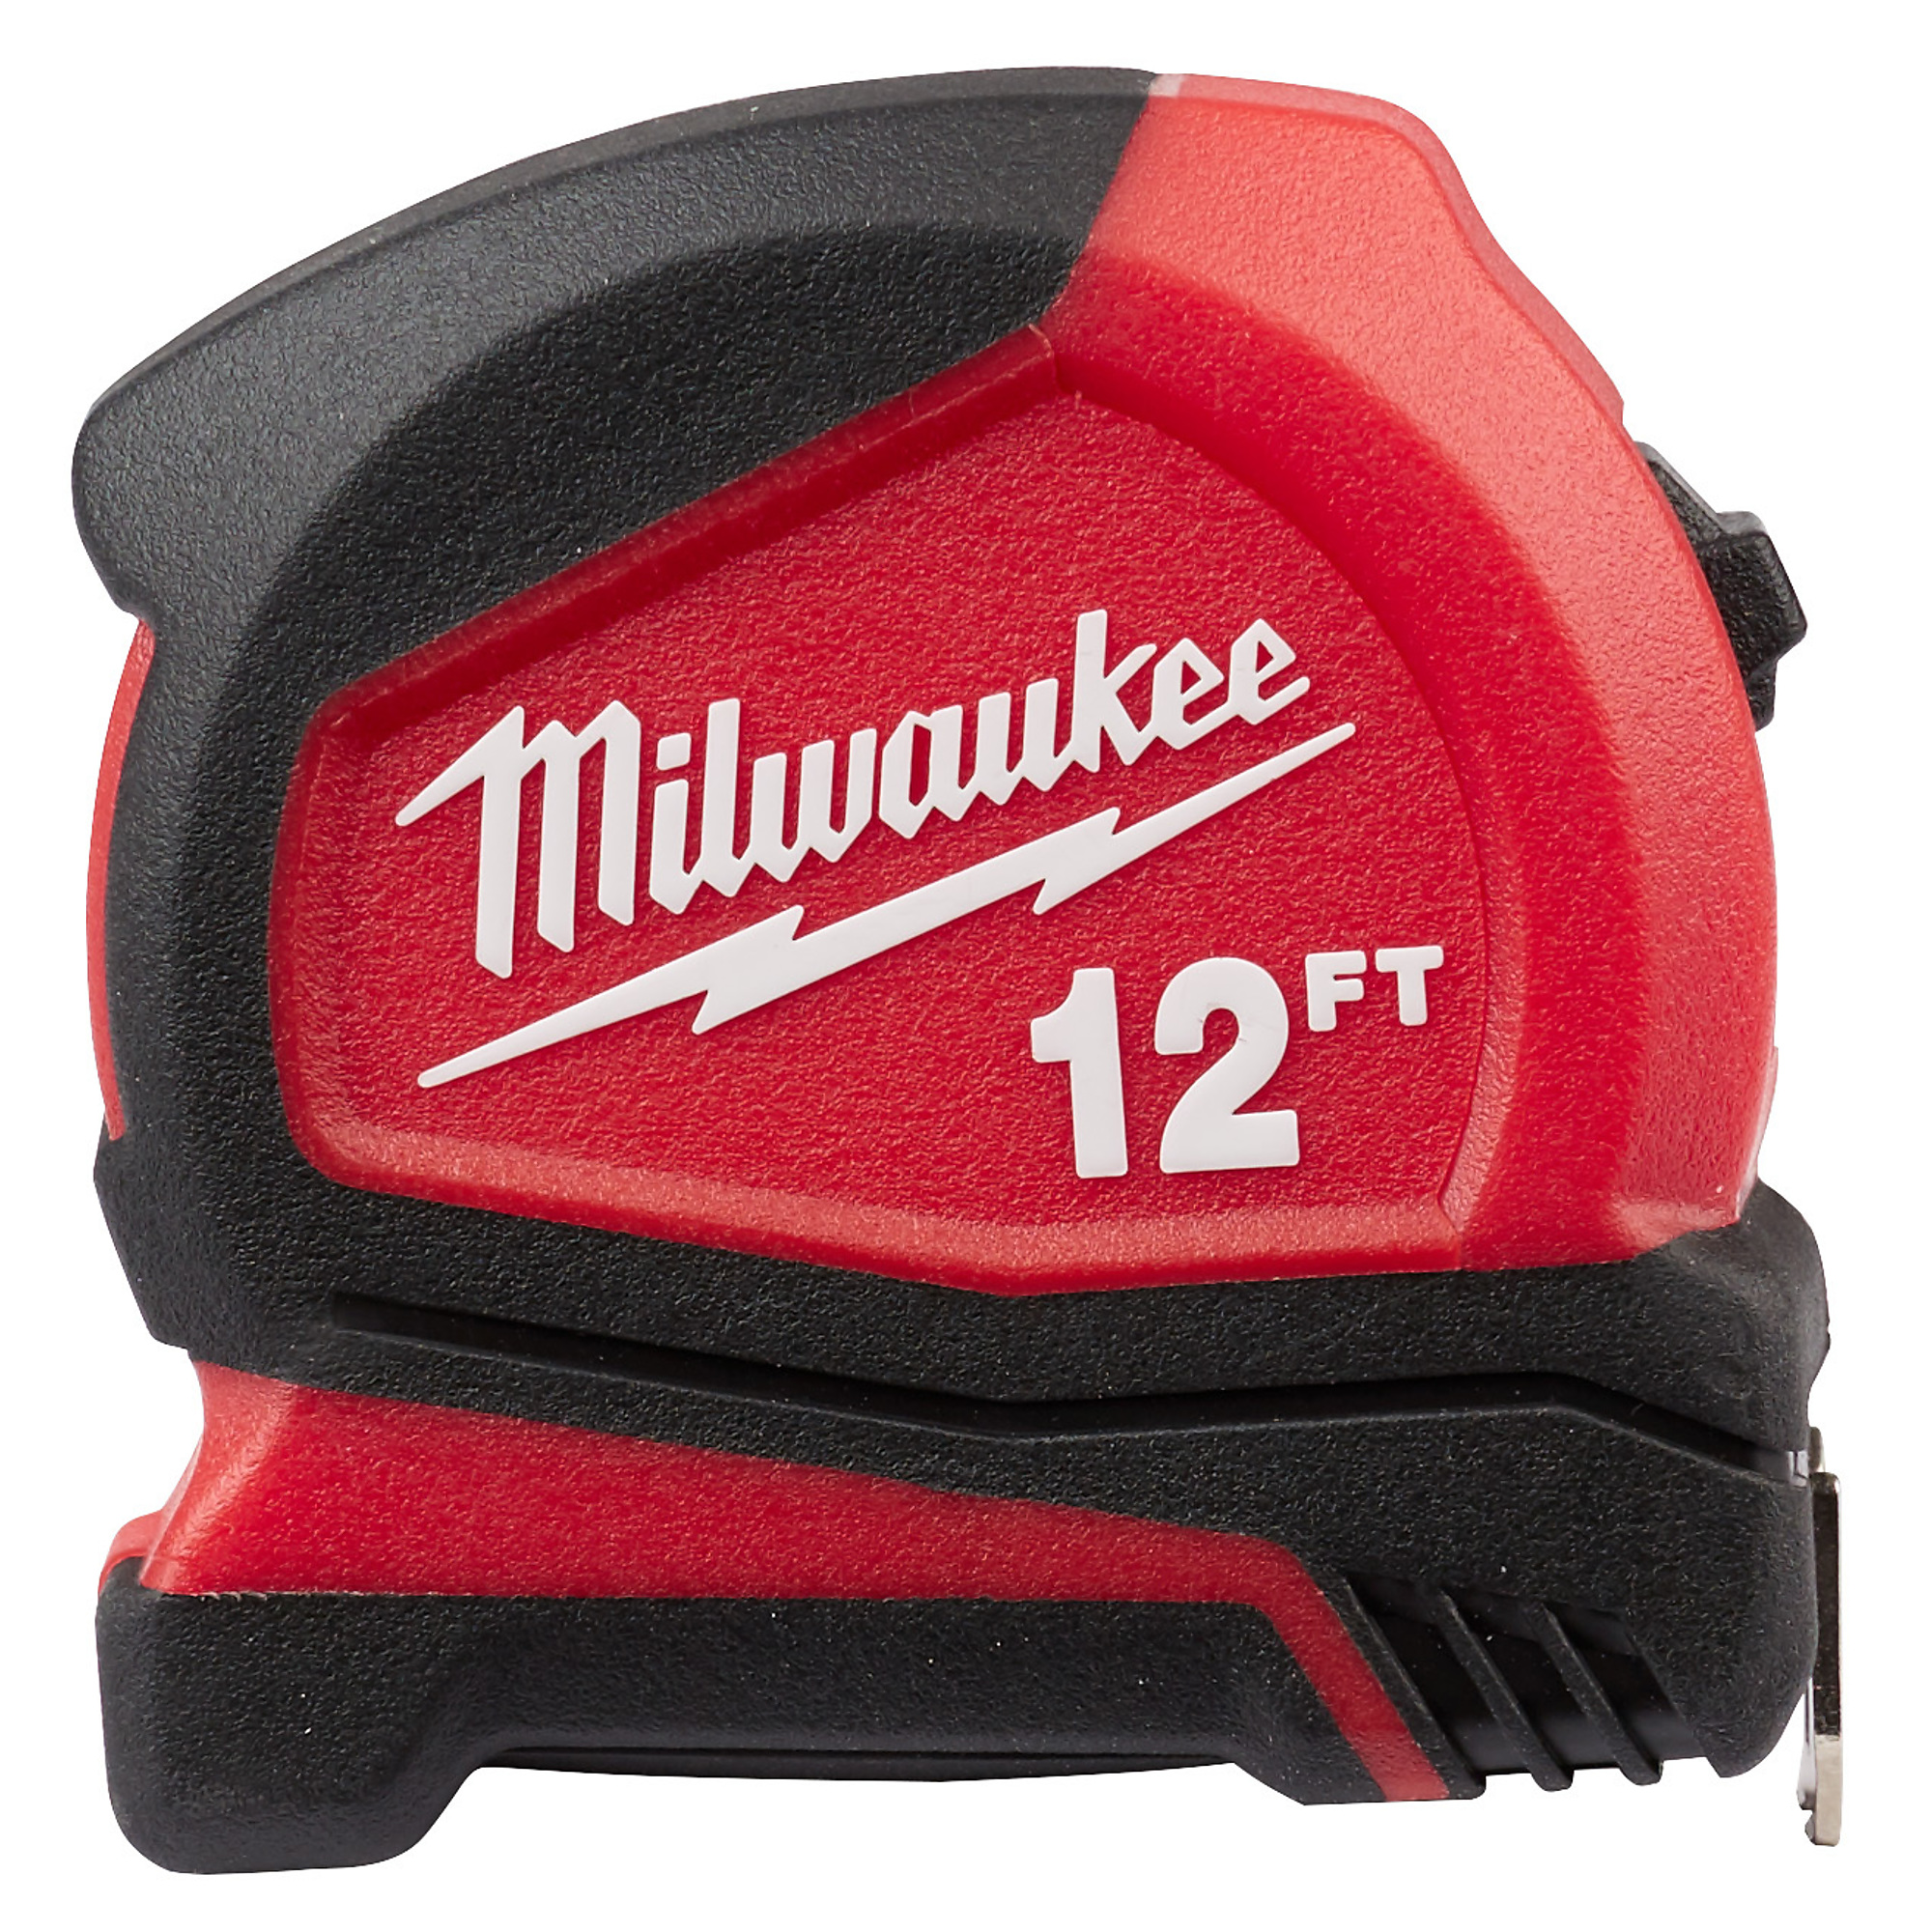 Milwaukee, 12ft. Compact Tape Measure, Measures up to 12 ft, Model 48-22-6612